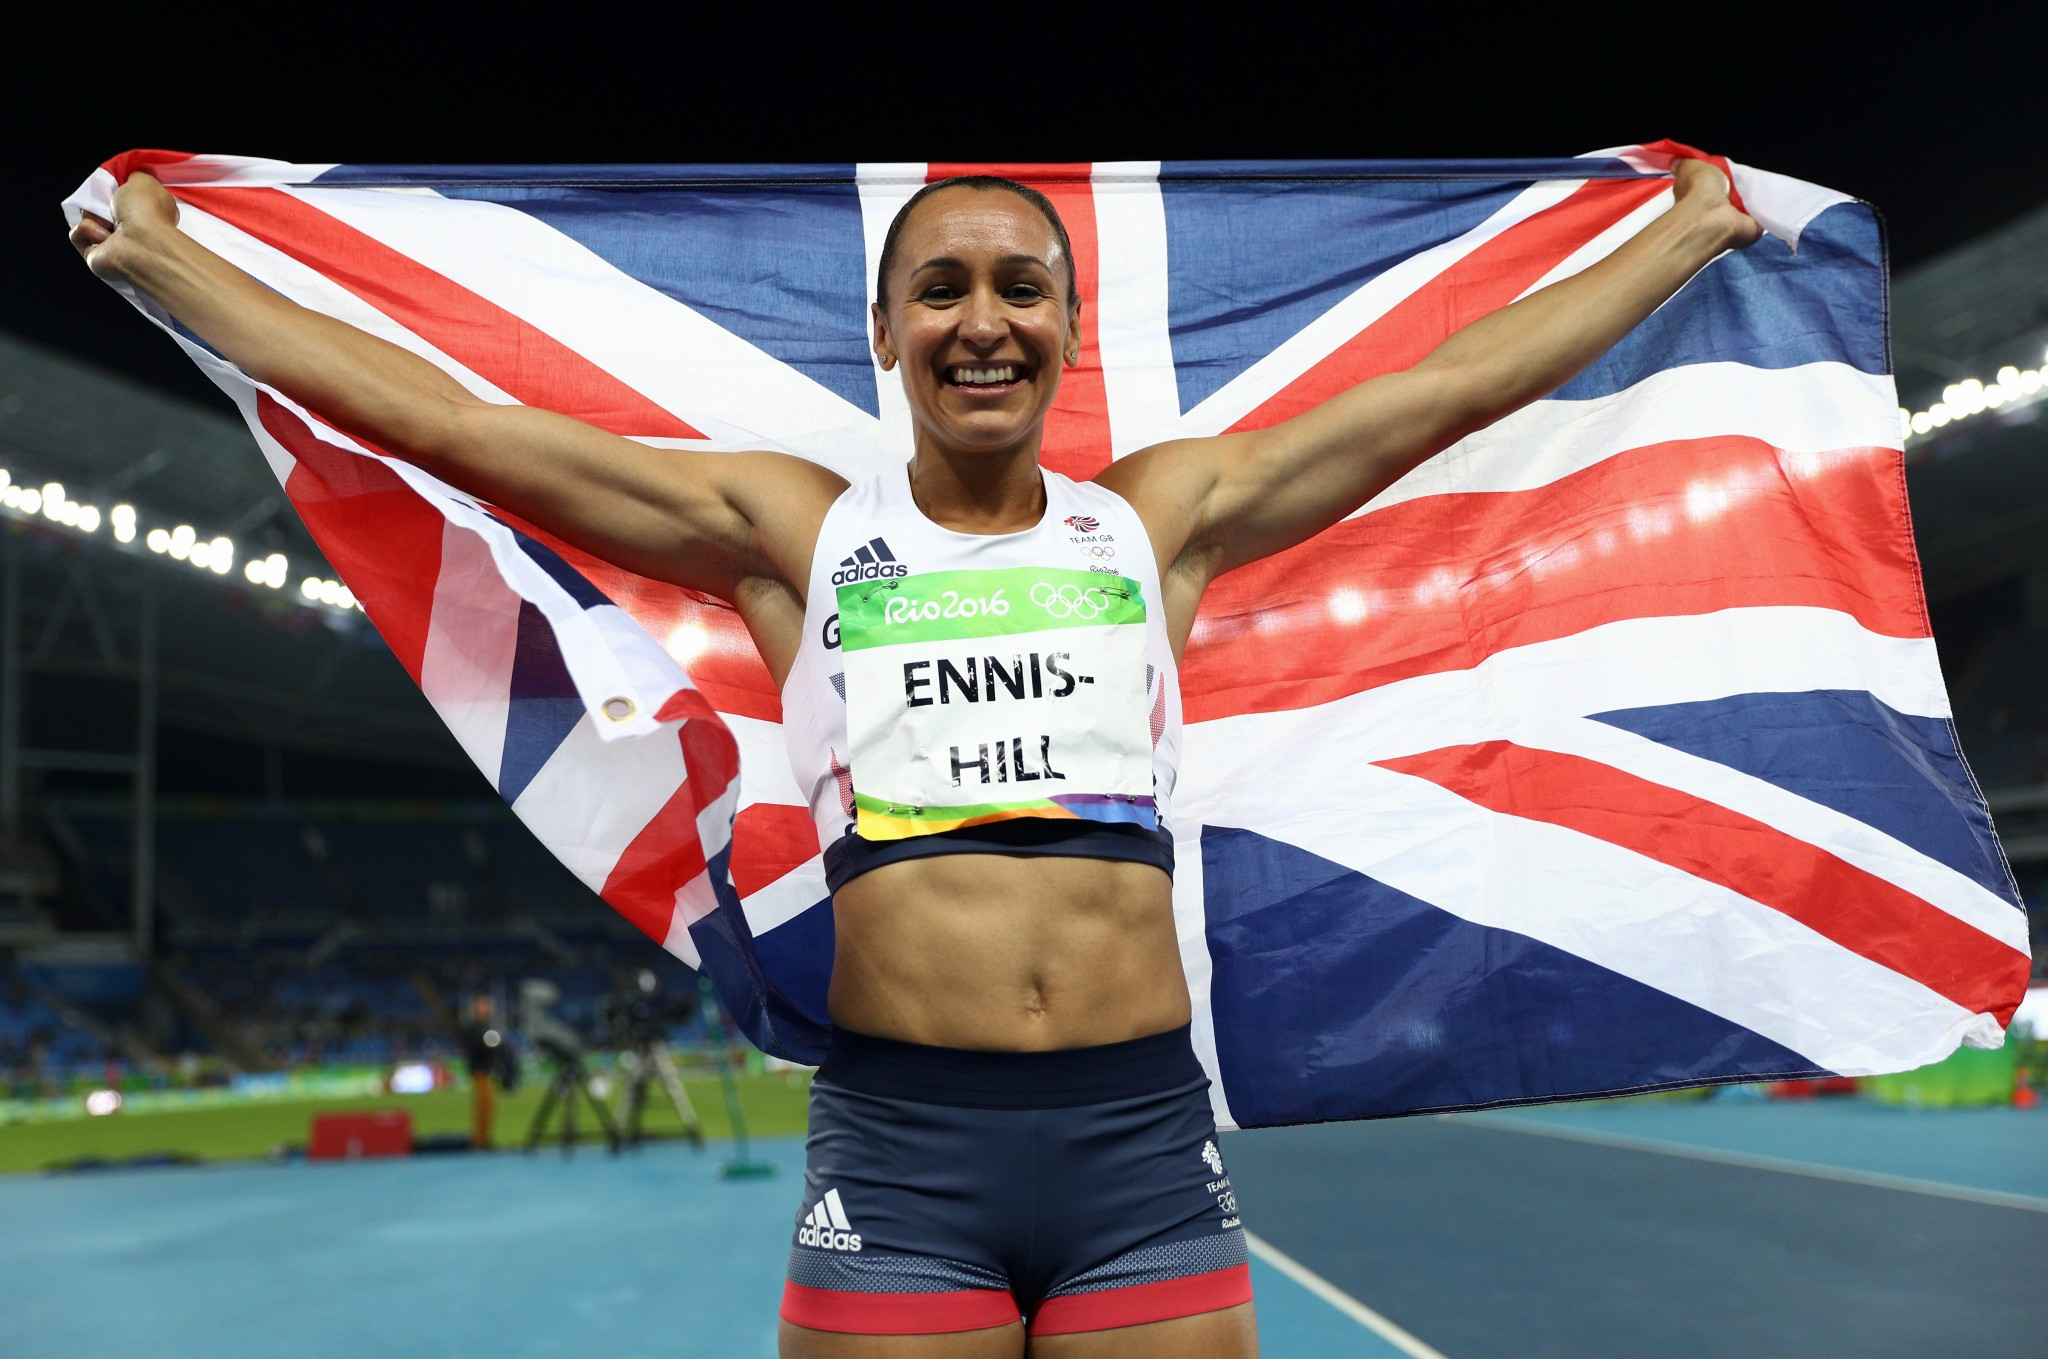 London 2012 heptathlon champion Jessica Ennis-Hill is among the Walk of Fame members ©Getty Images